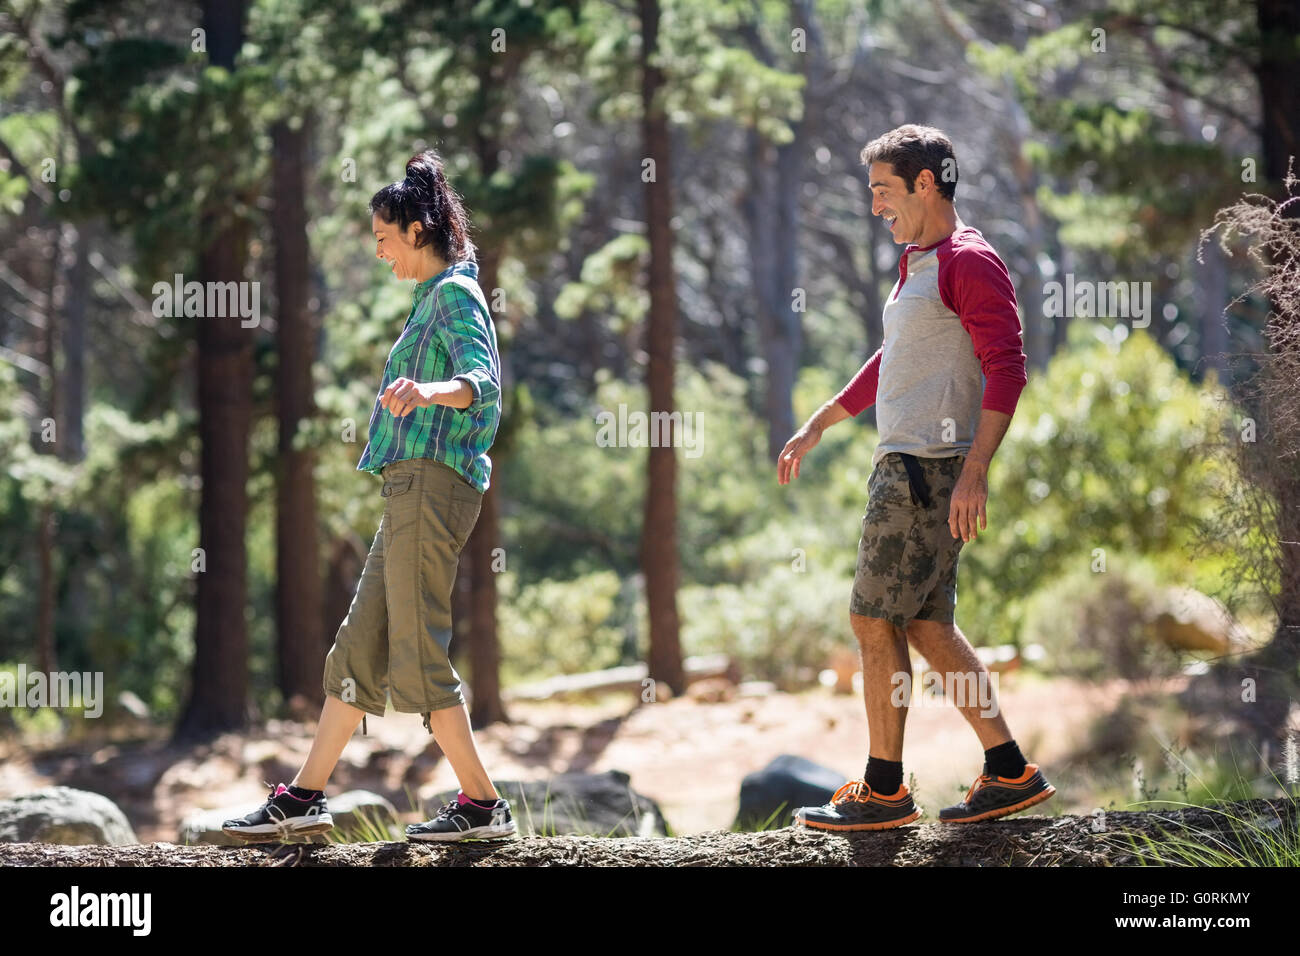 Couple smiling and walking with balance Stock Photo